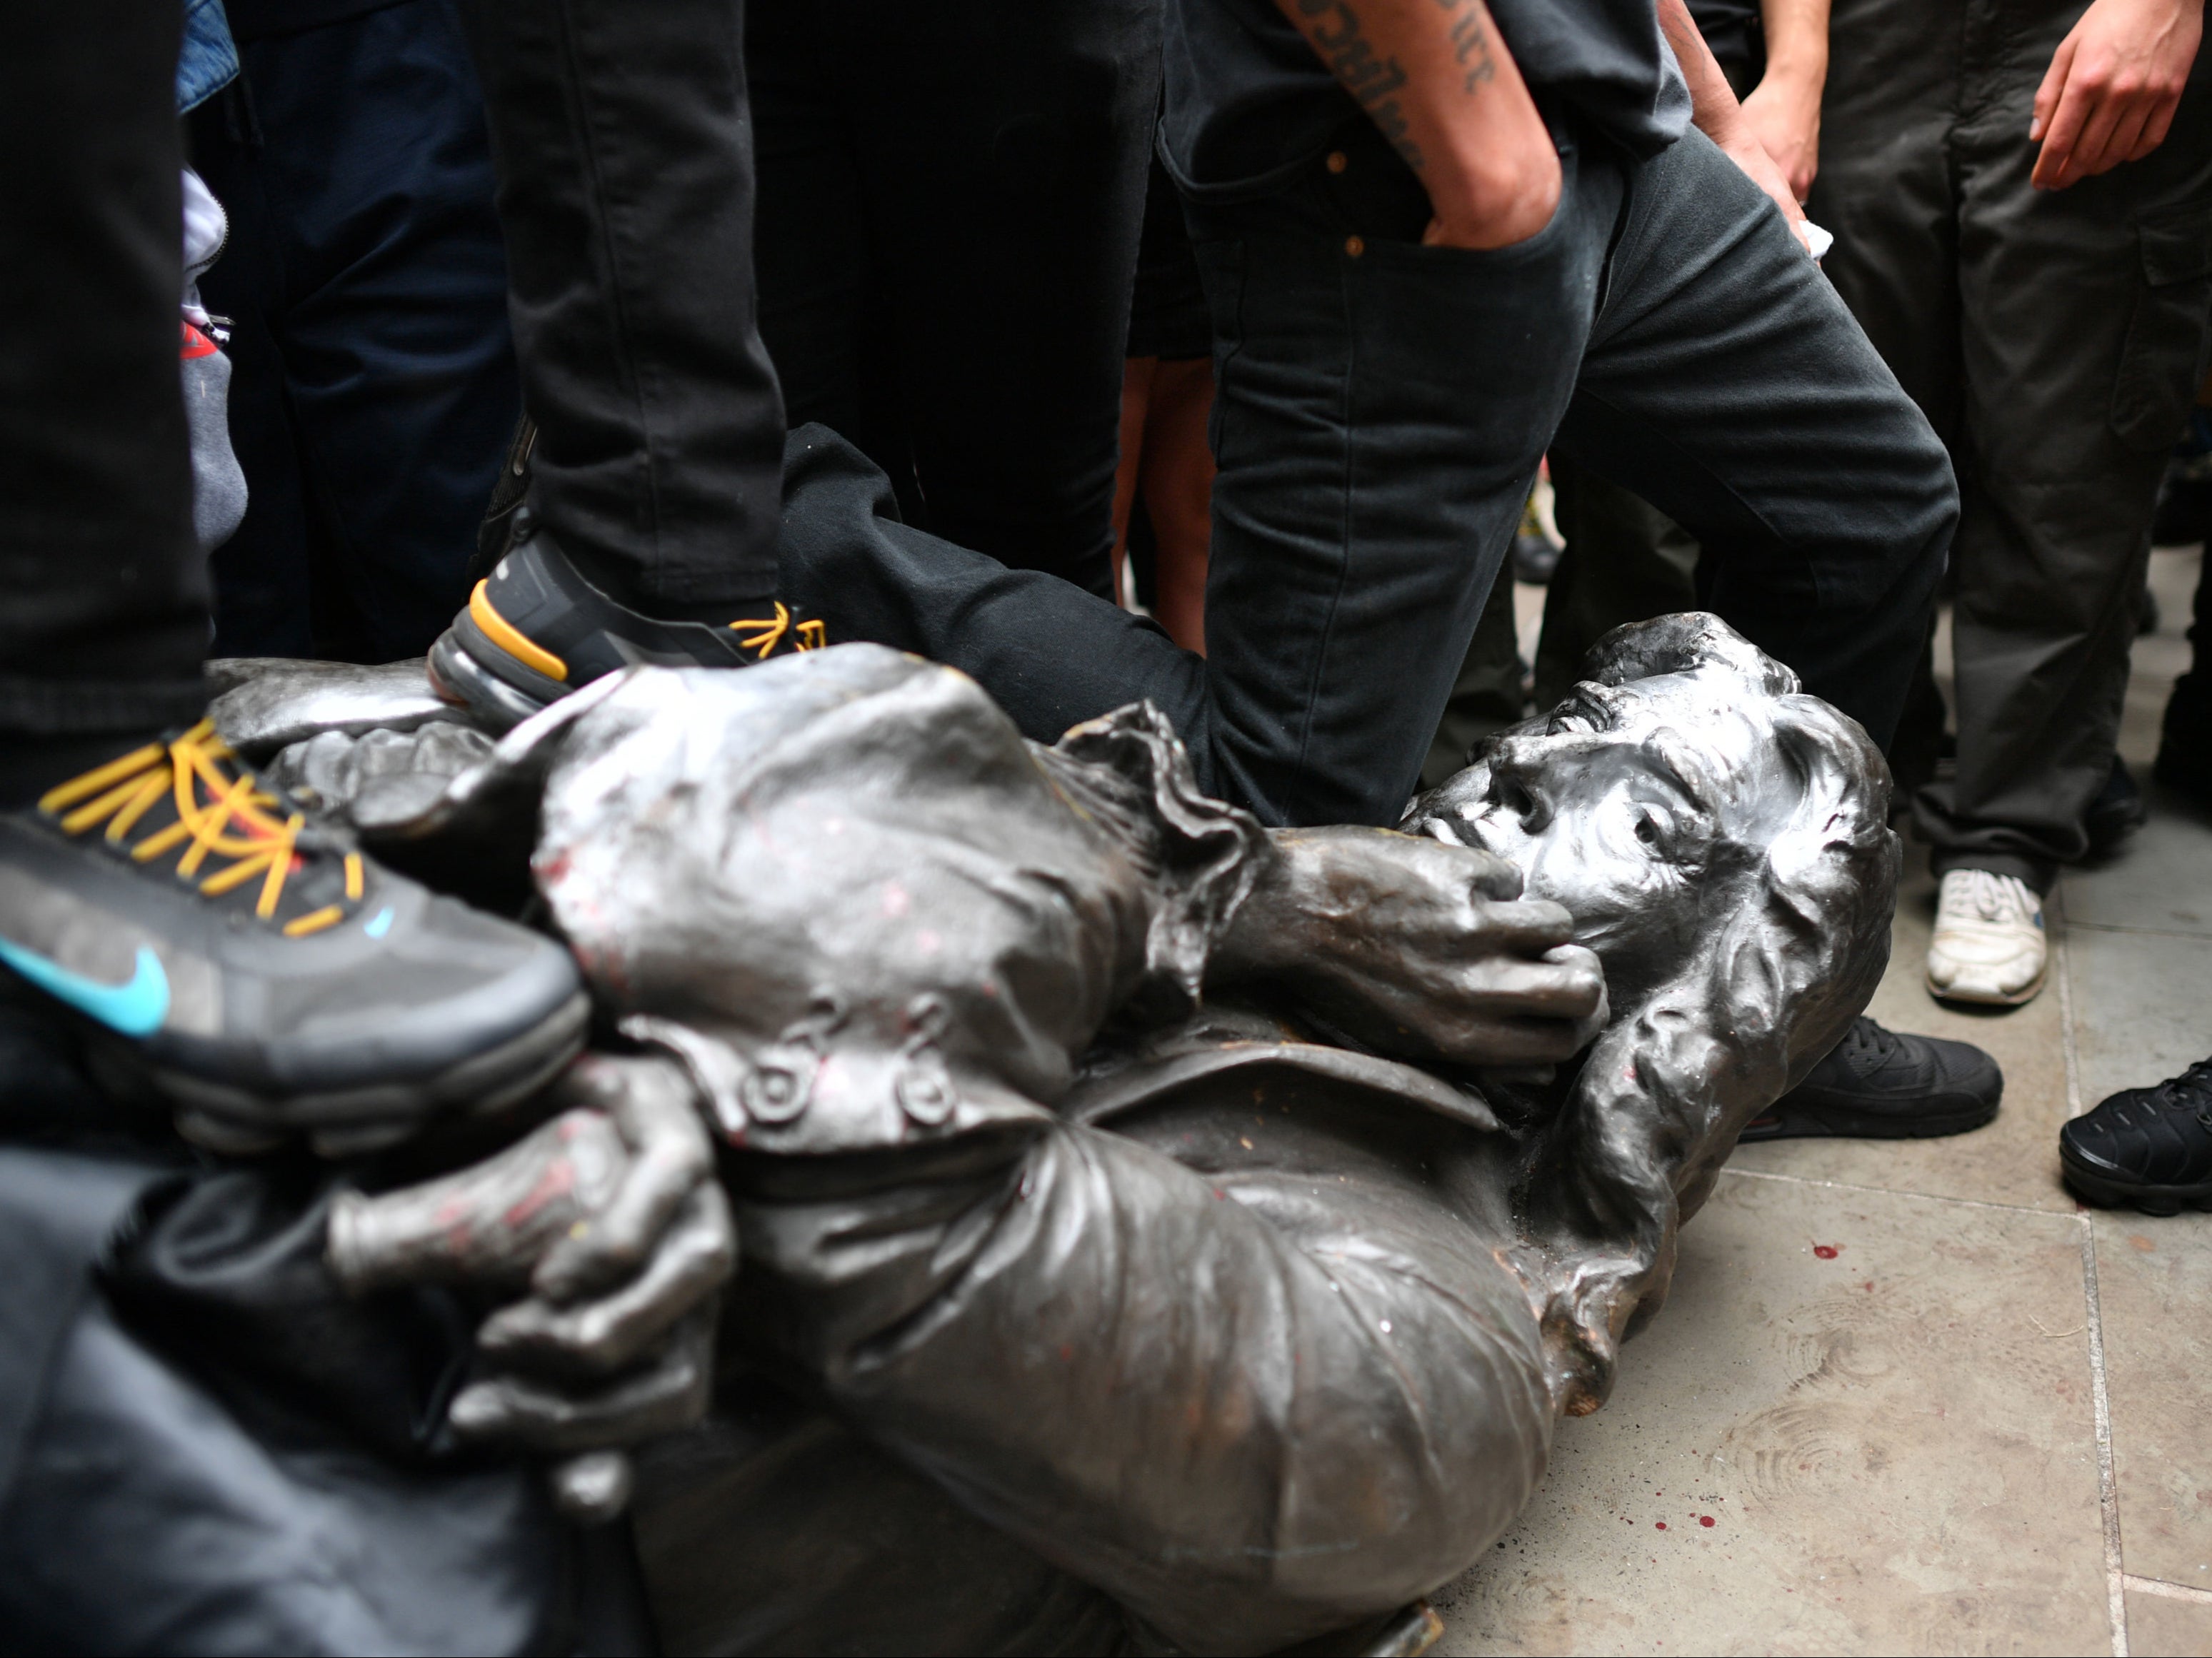 The Edward Colston statue at the feet of protesters after it was pulled down during a Black Lives Matter rally